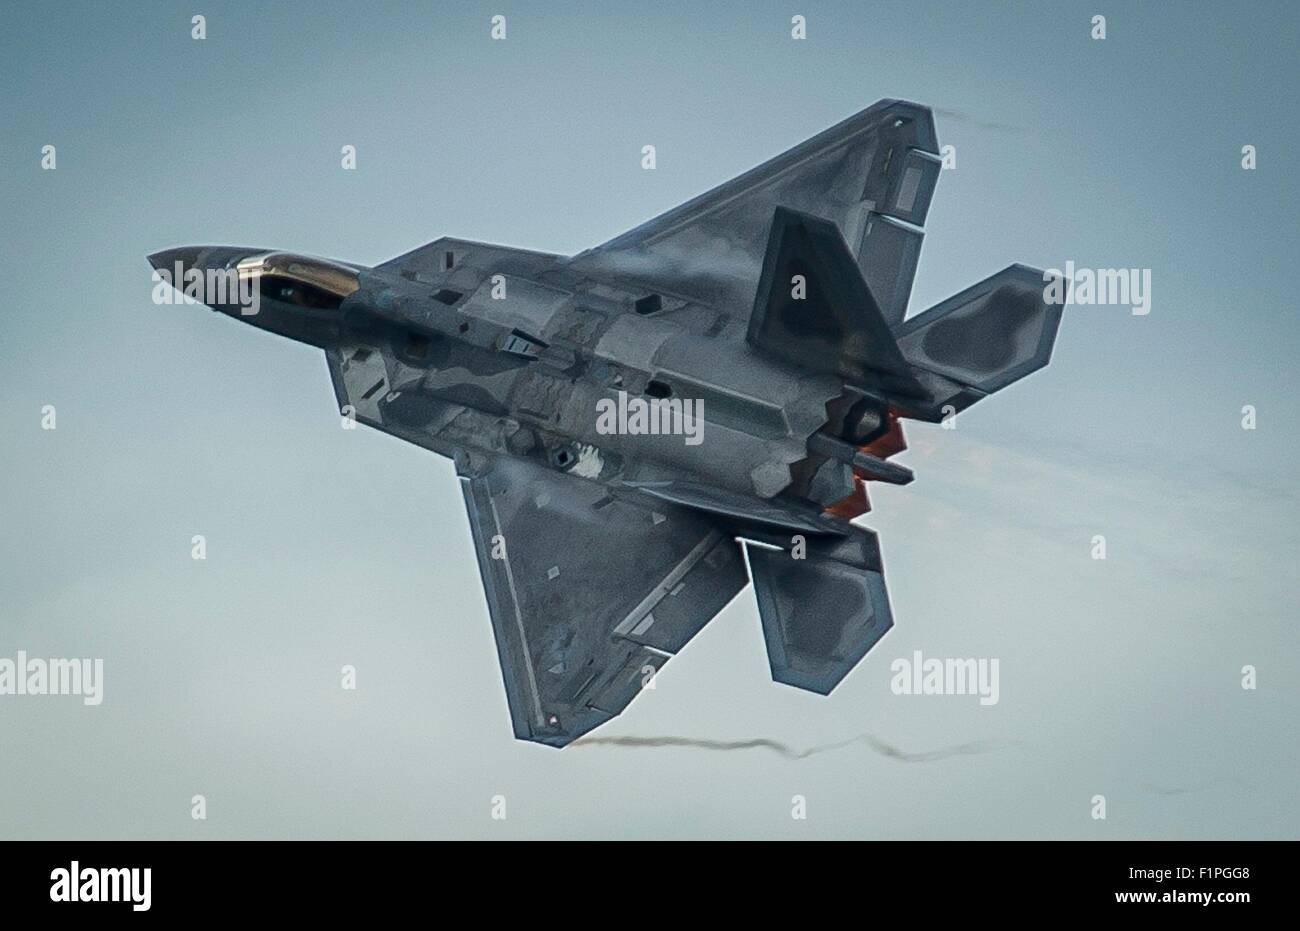 A U.S. Air Force F-22 Raptor stealth fighter aircraft takes off from Amari Air Base after a brief forward deployment in support of NATO partners in Europe September 4, 2015 in Harjumaa, Estonia. Stock Photo